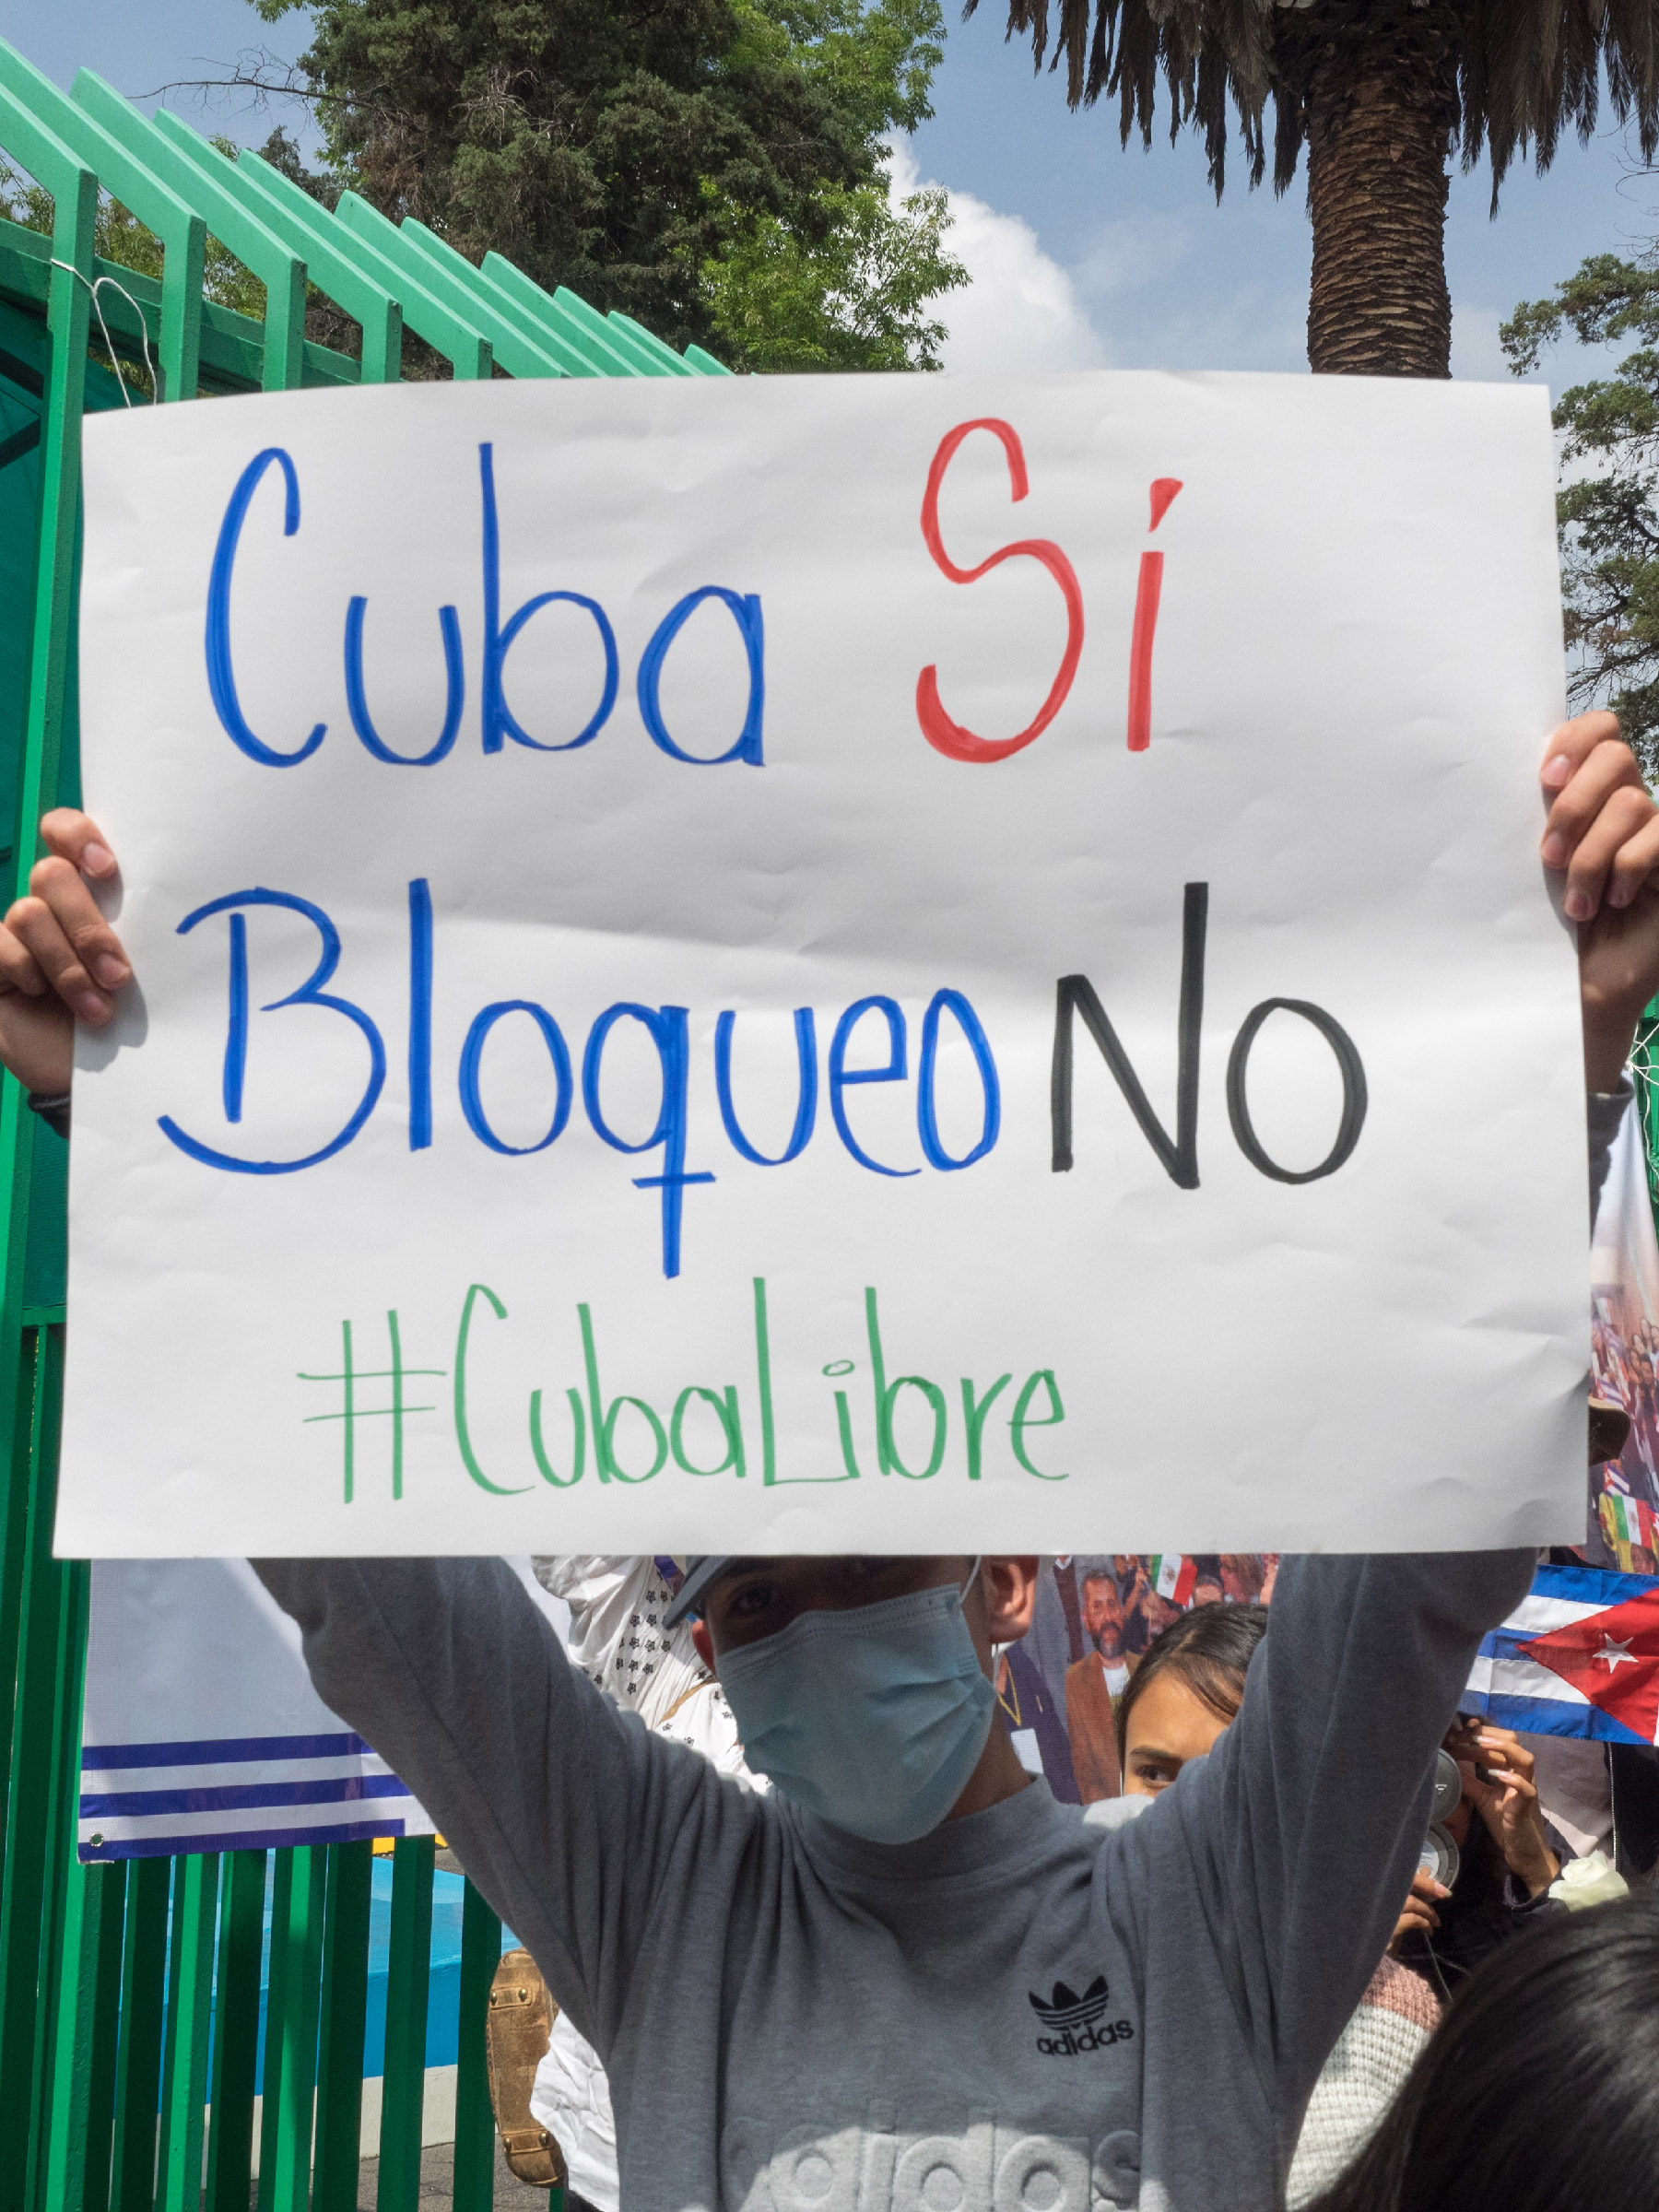 A demonstrator holds up a sign that reads "Cuba Yes, Blockade No" during a demonstration in solidarity with the Cuban Revolution in front of the Cuban embassy in Mexico City, Mexico, July 17, 2021.